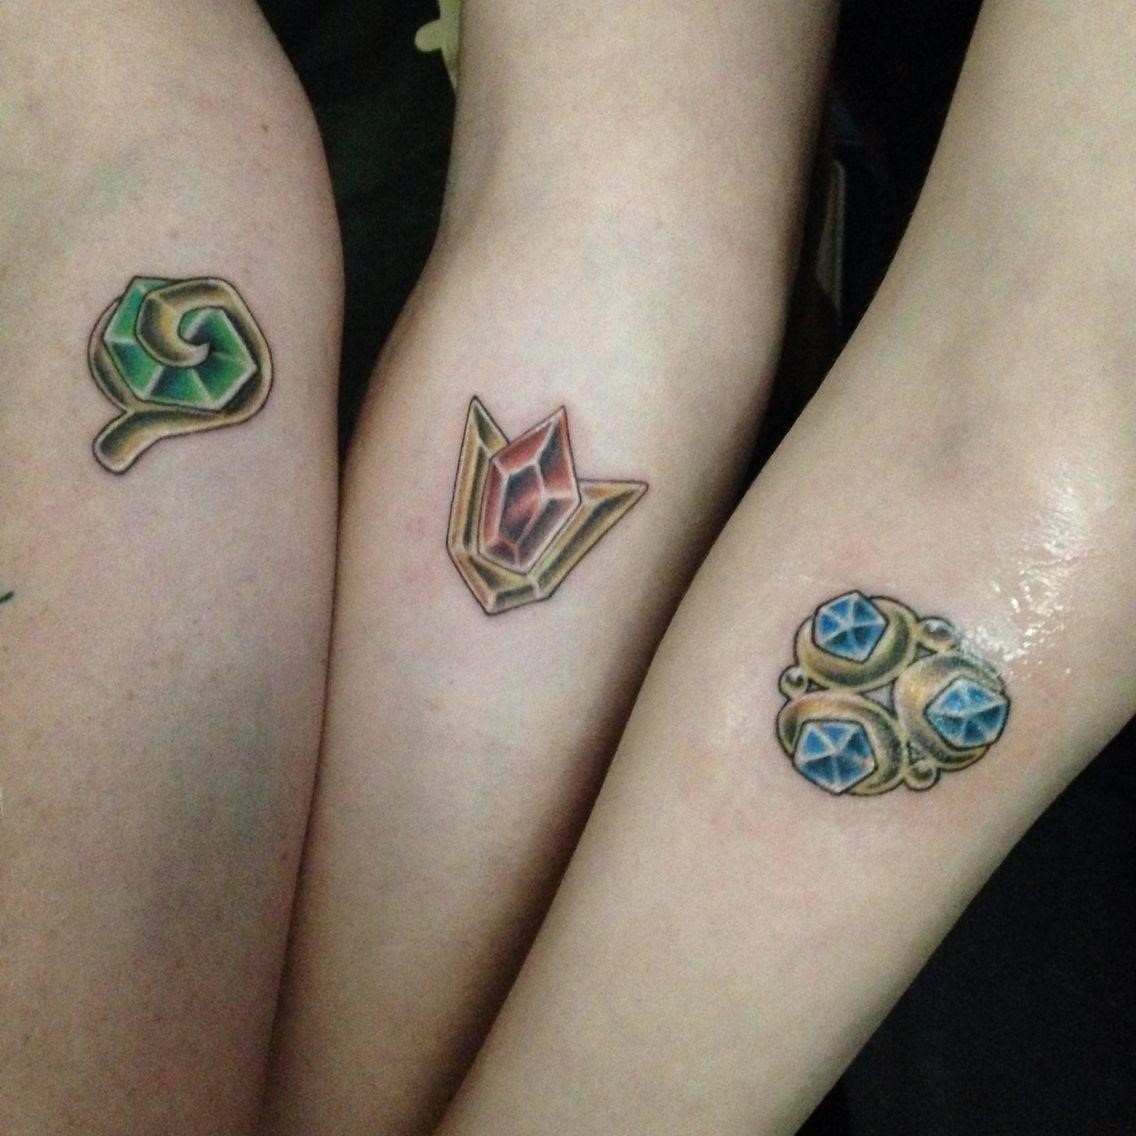 Heartwarming Tattoos That Show Love For Your Family